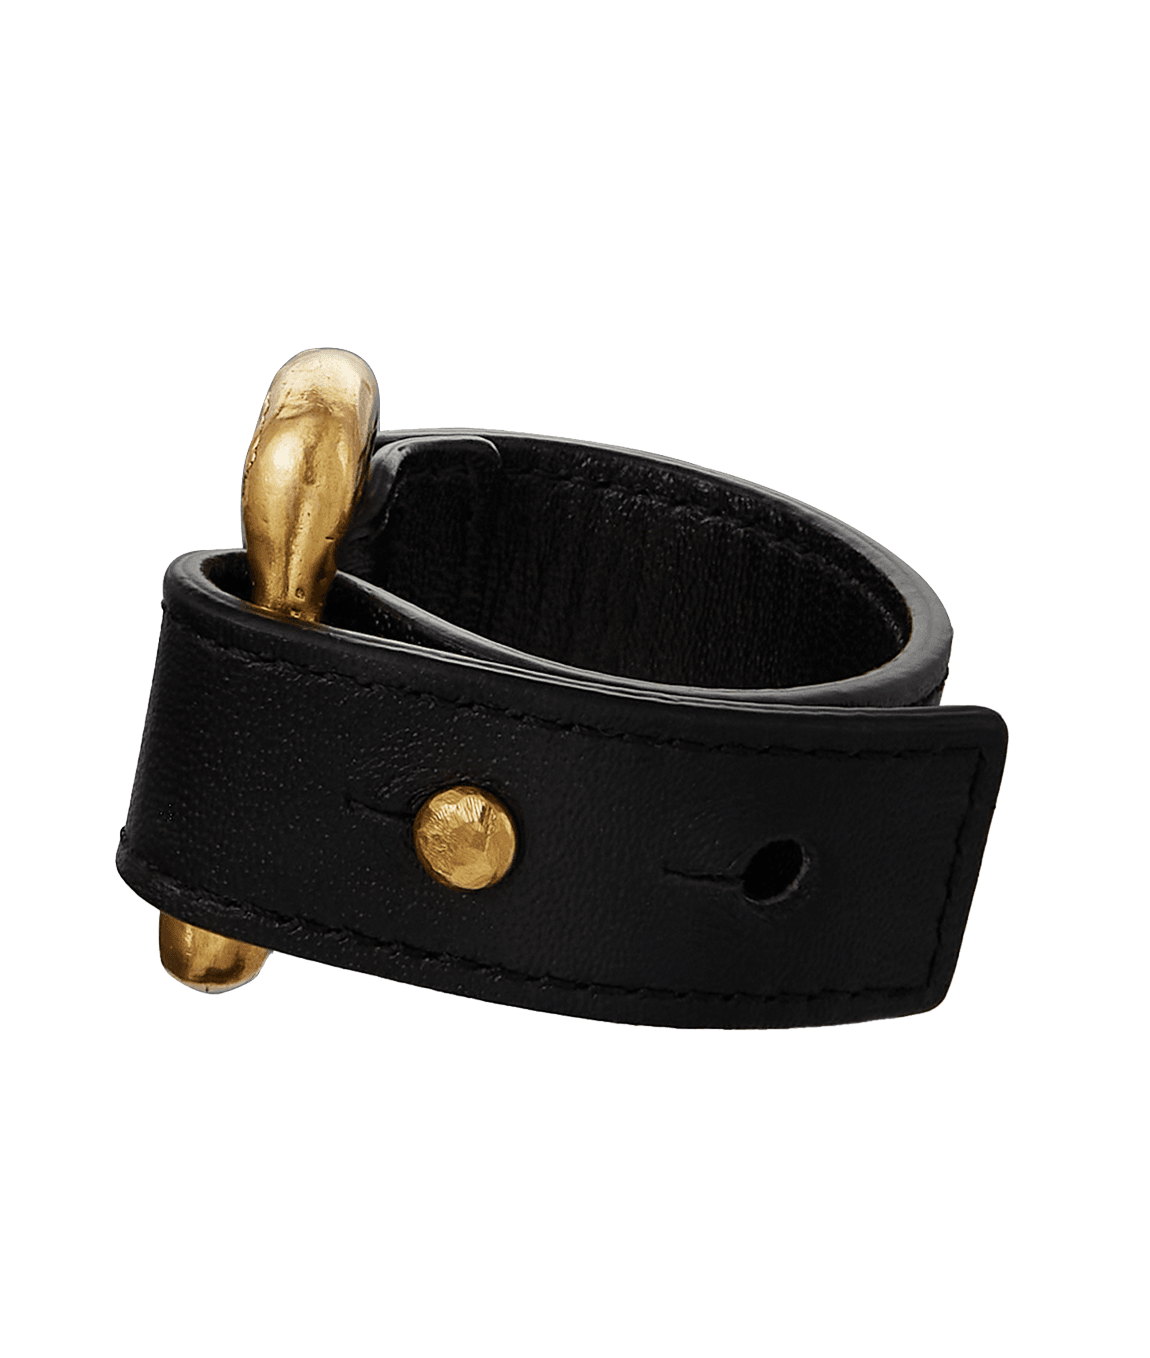 The Link of Wanderlust Leather Cuff